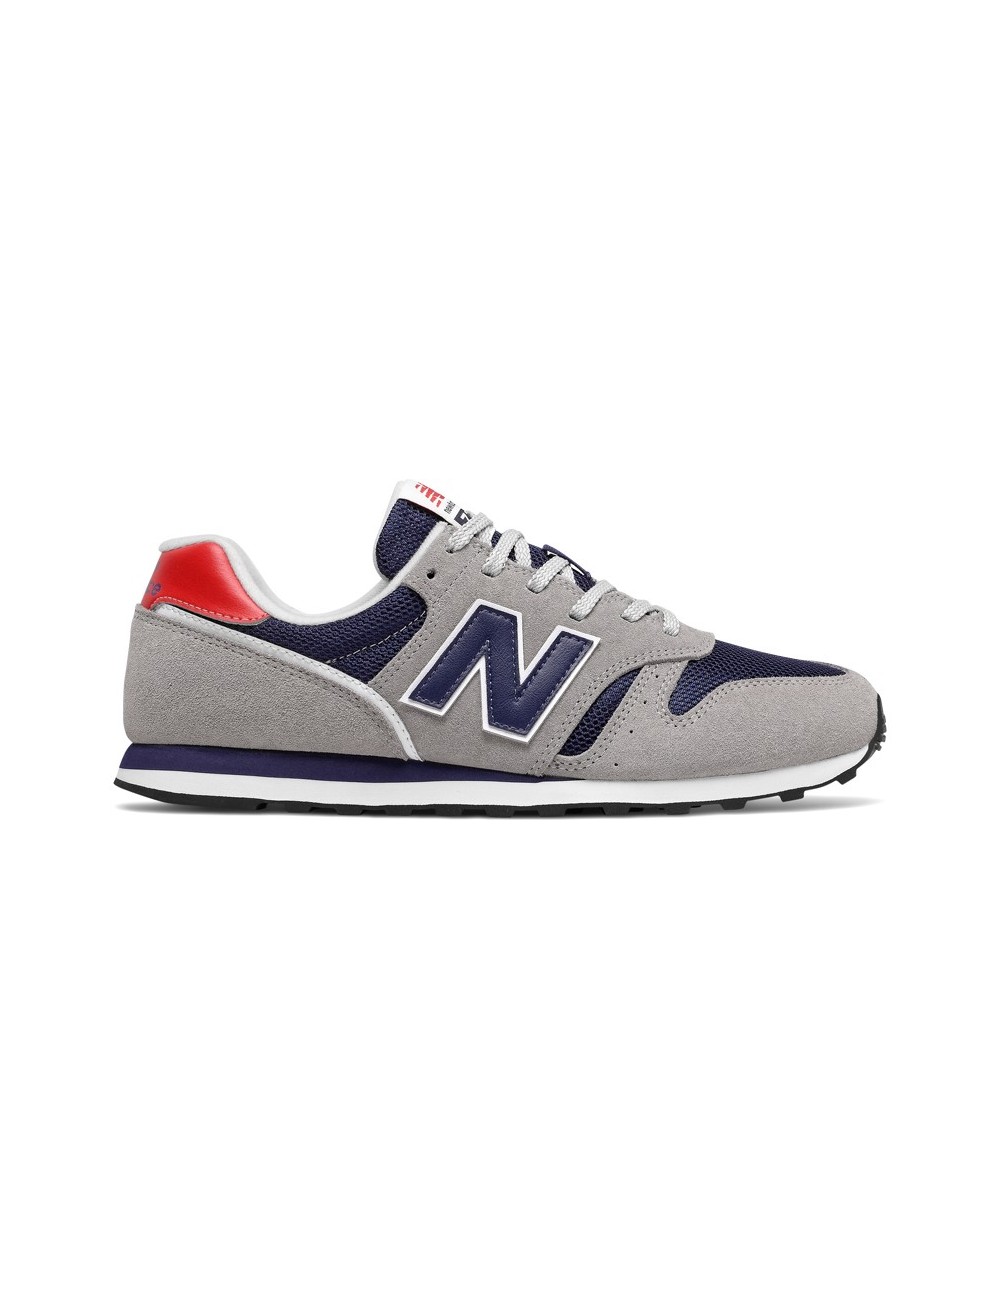 SNEAKERS HOMBRE NEW BALANCE ML373 GRIS